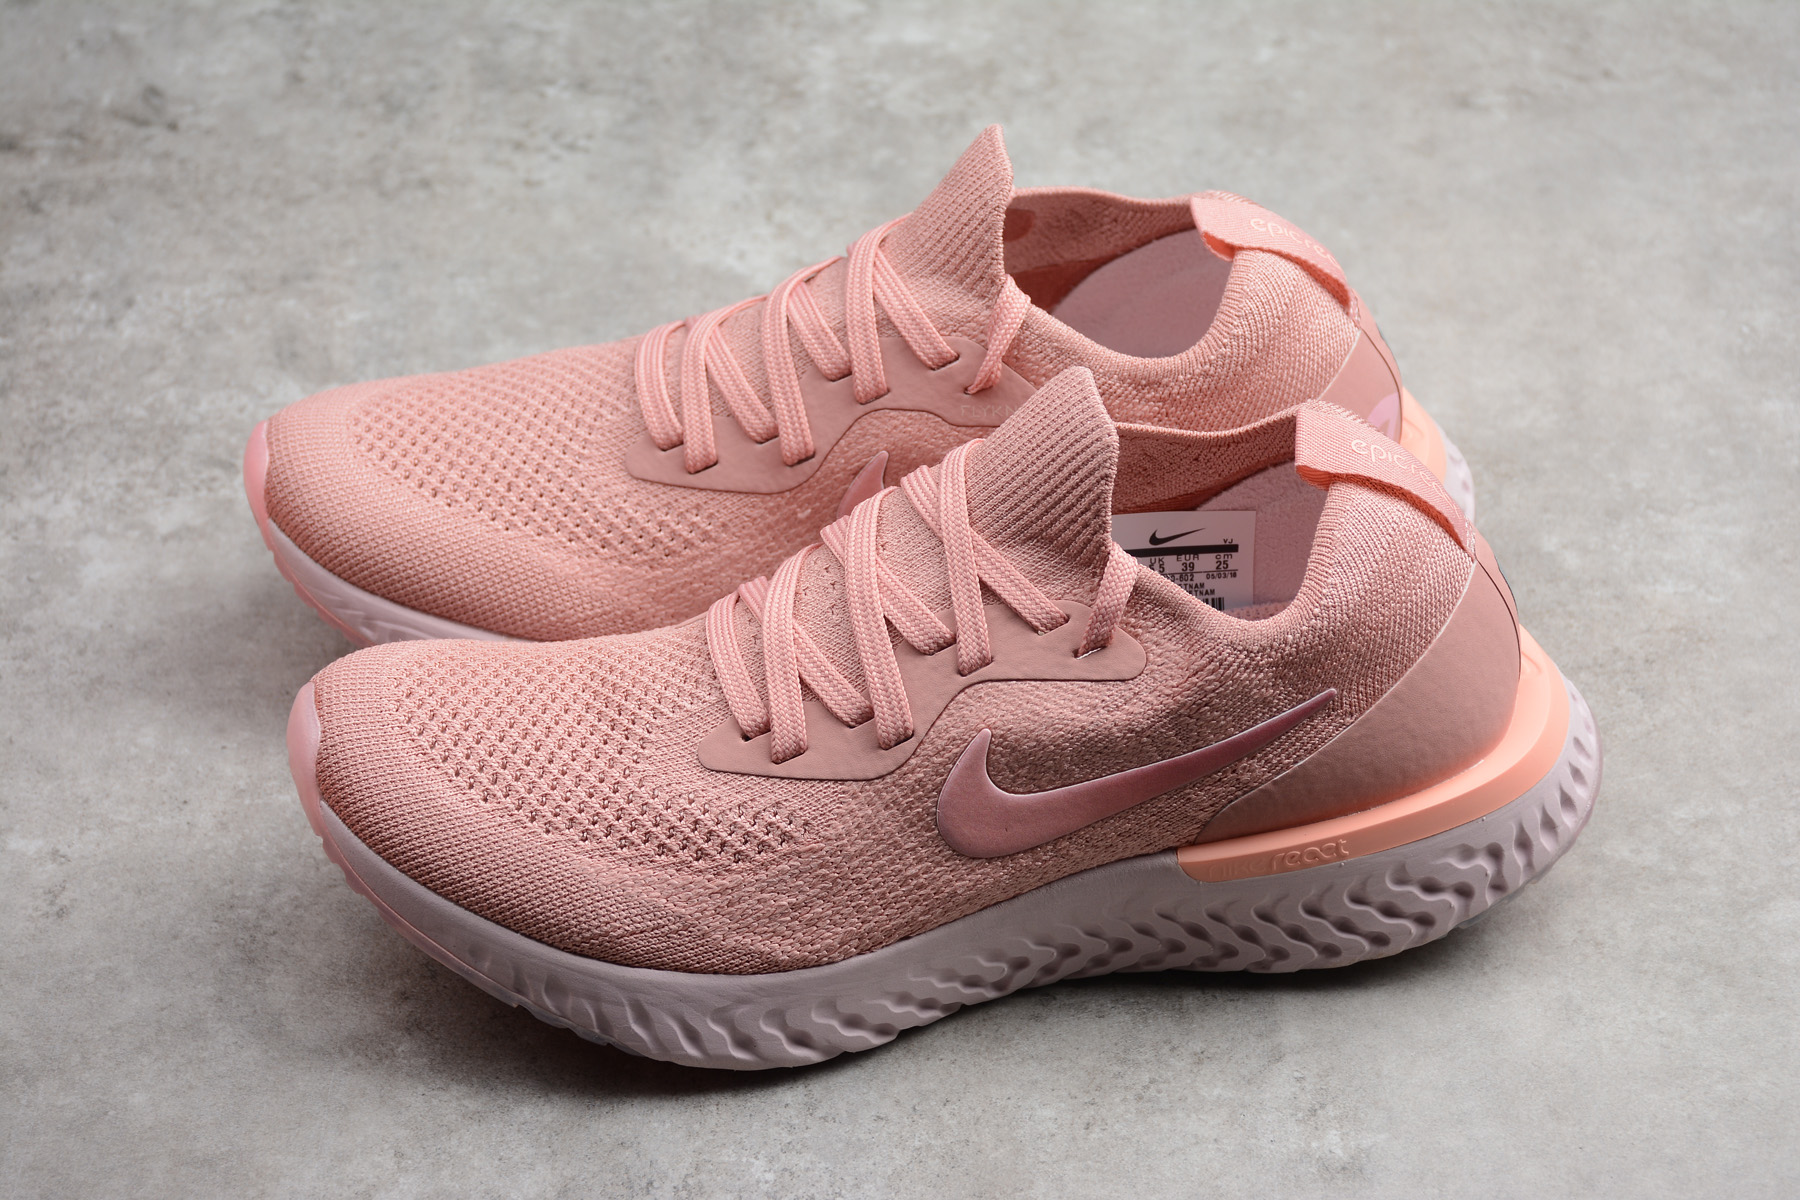 Nike Epic React Flyknit Wmns Rust Pink/Pink Tint/Tropical Pink 